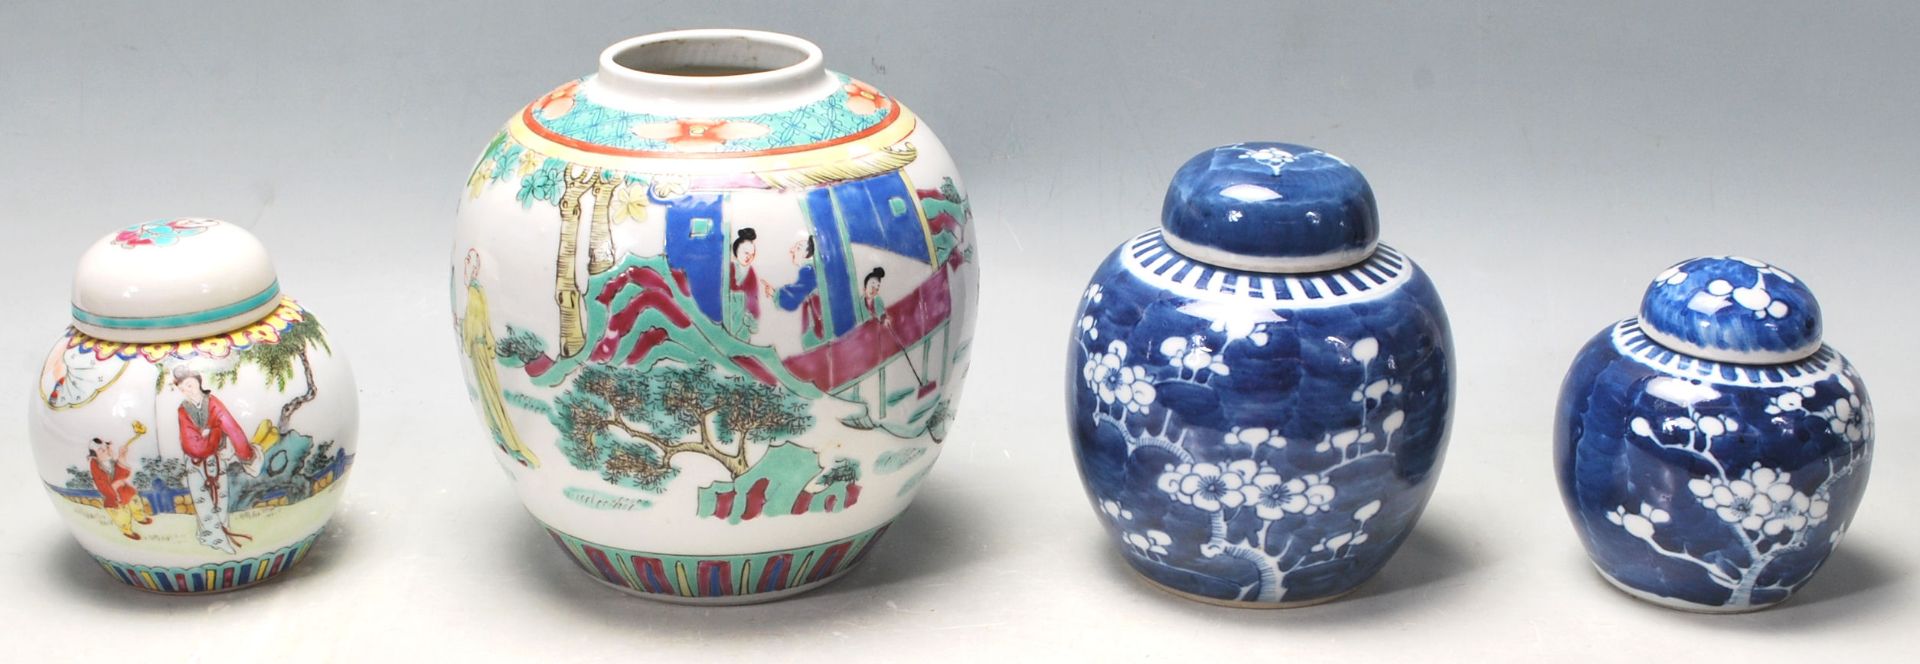 FOUR EARLY 20TH CENTURY CHINESE GINGER JAR OF VARIOUS DESIGN AND SIZES